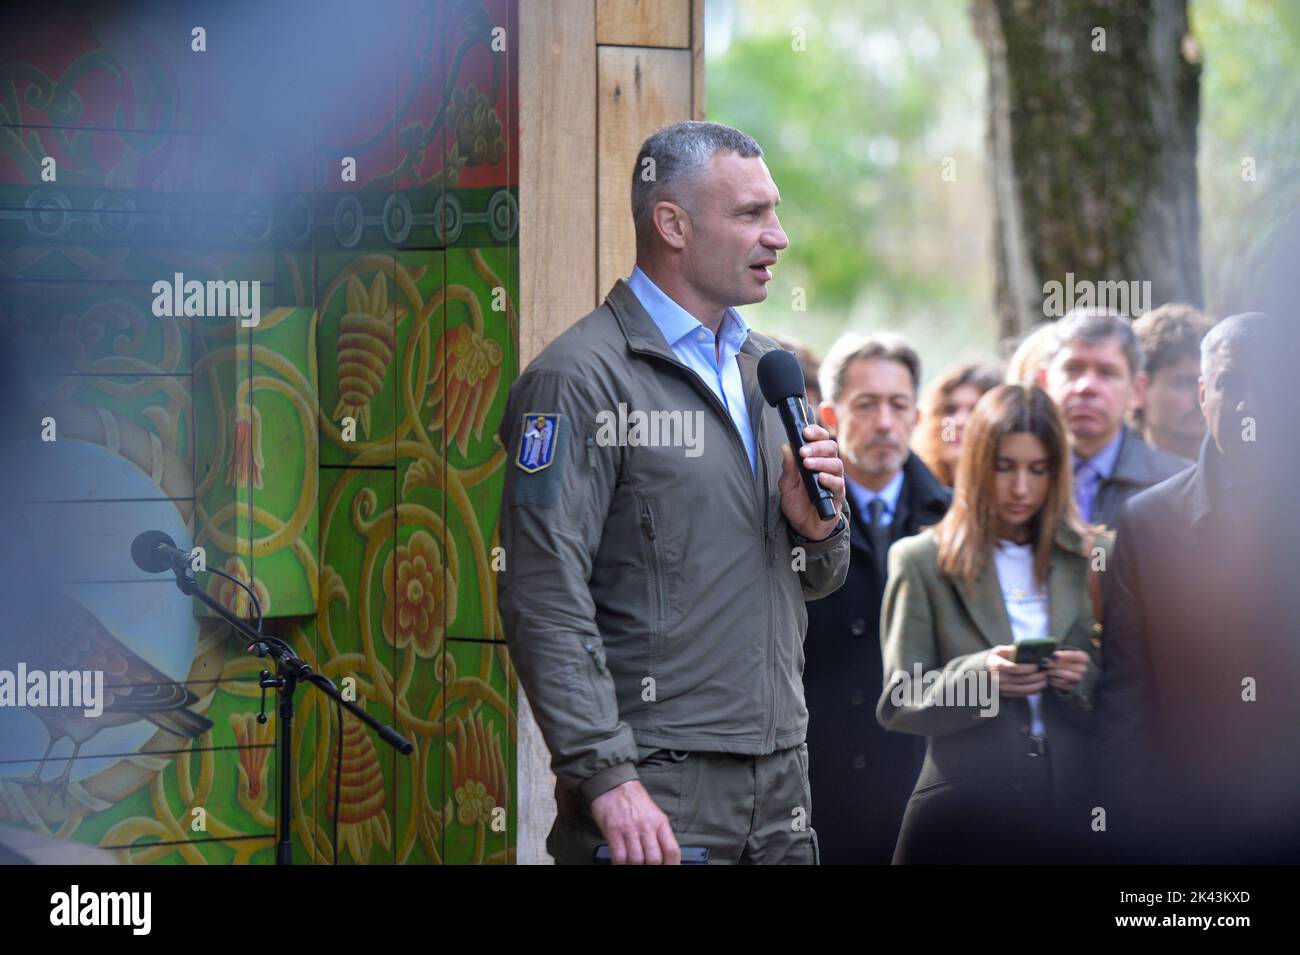 KYIV, UKRAINE - SEPTEMBER 29, 2022 - Kyiv Mayor Vitali Klitschko speaks during a joint interreligious prayer dedicated to the Day of Remembrance of the Babyn Yar Victims at the symbolic Place for Reflection synagogue on the territory of the Babyn Yar National Historical and Memorial Reserve, Kyiv, capital of Ukraine. Stock Photo